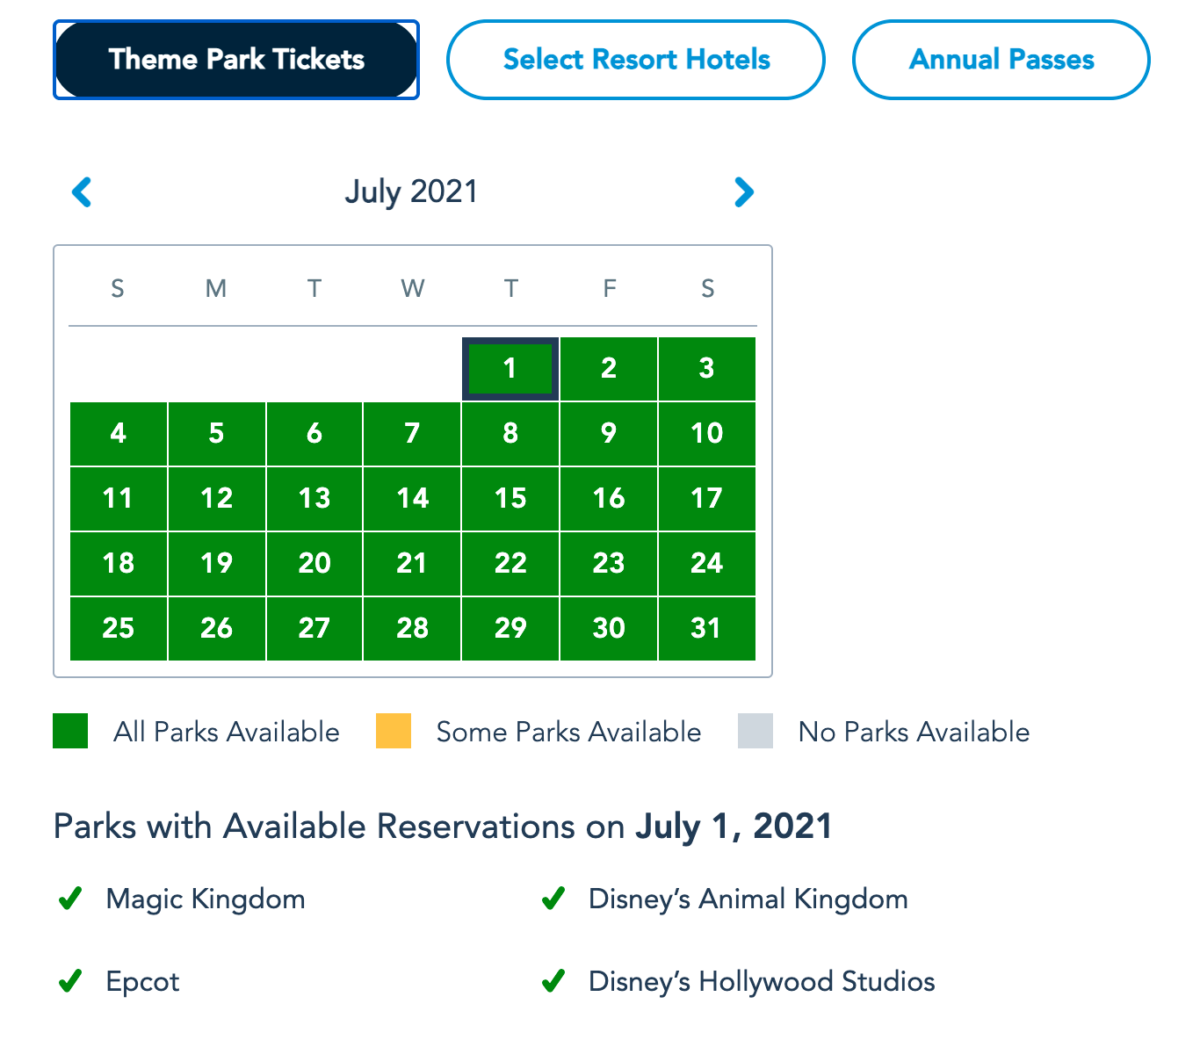 june-july-2021-theme-park-reservation-availability-wdw-4-6126968